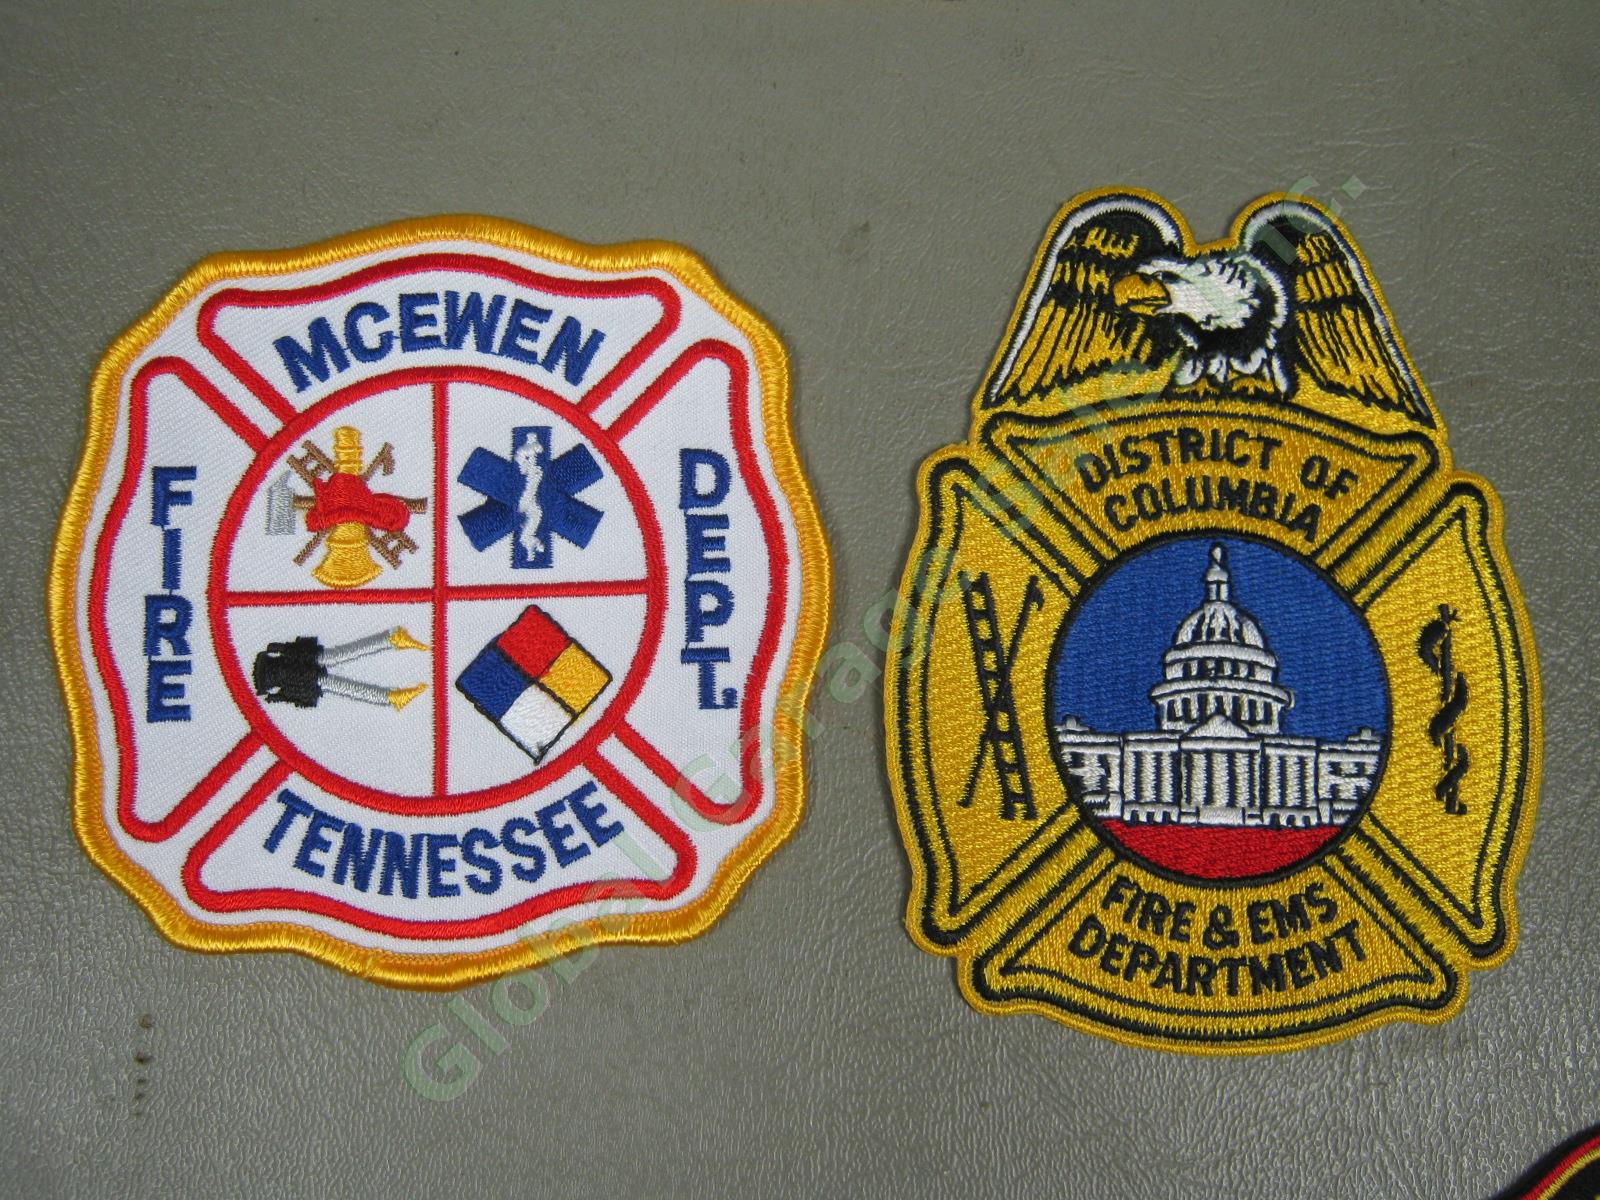 40 New & Used Fire Dept Firefighter Cloth Patch Lot Chicago New York Afghanistan 9